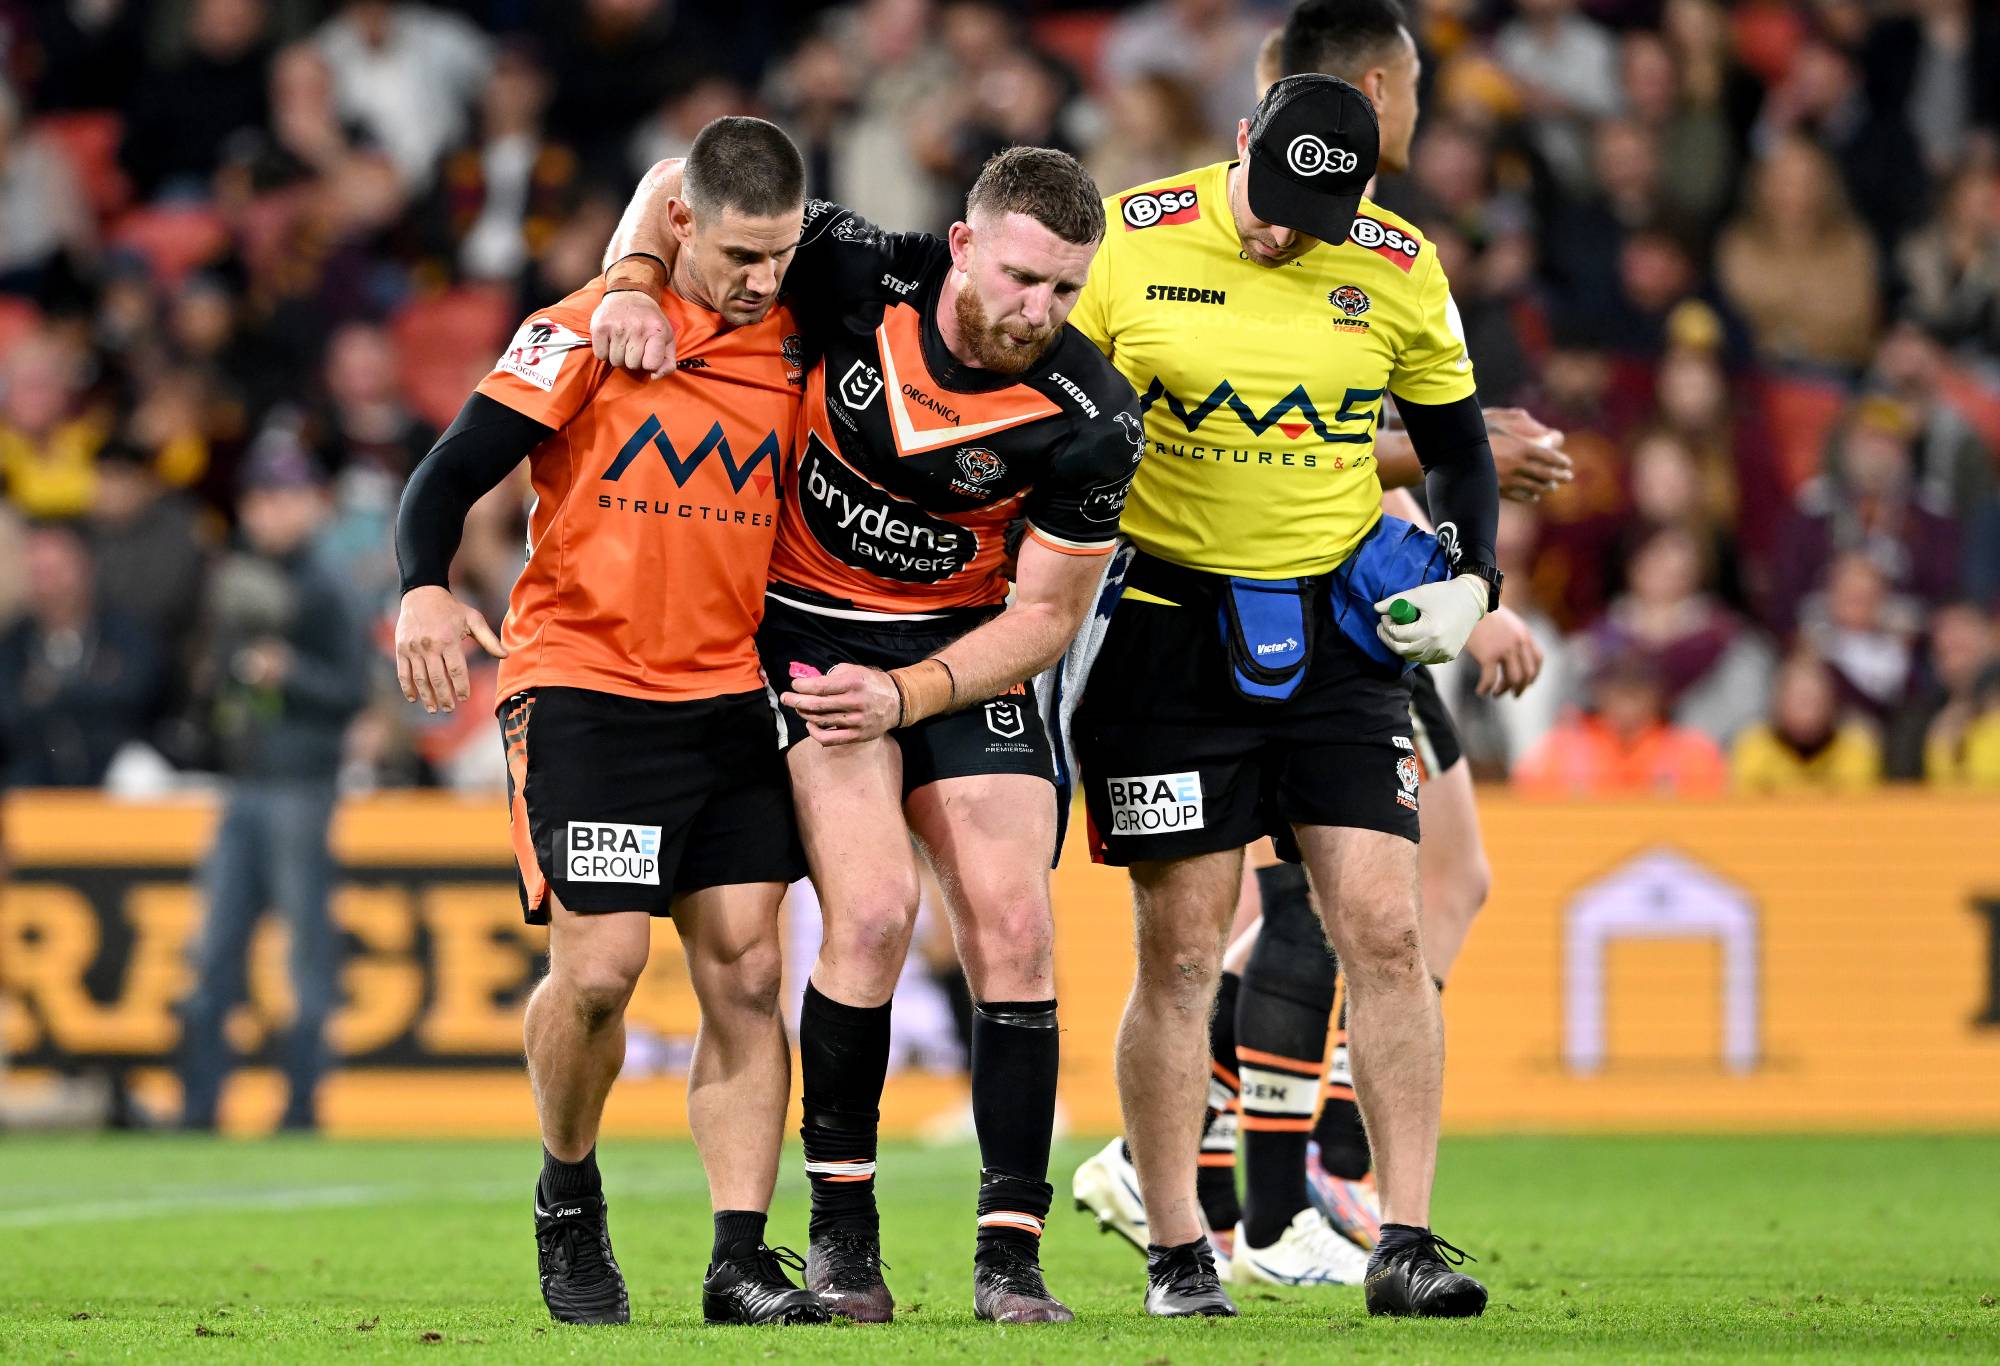 BRISBANE, AUSTRALIA - JULY 30: Jackson Hastings of the Tigers is injured during the round 20 NRL match between the Brisbane Broncos and the Wests Tigers at Suncorp Stadium, on July 30, 2022, in Brisbane, Australia. (Photo by Bradley Kanaris/Getty Images)